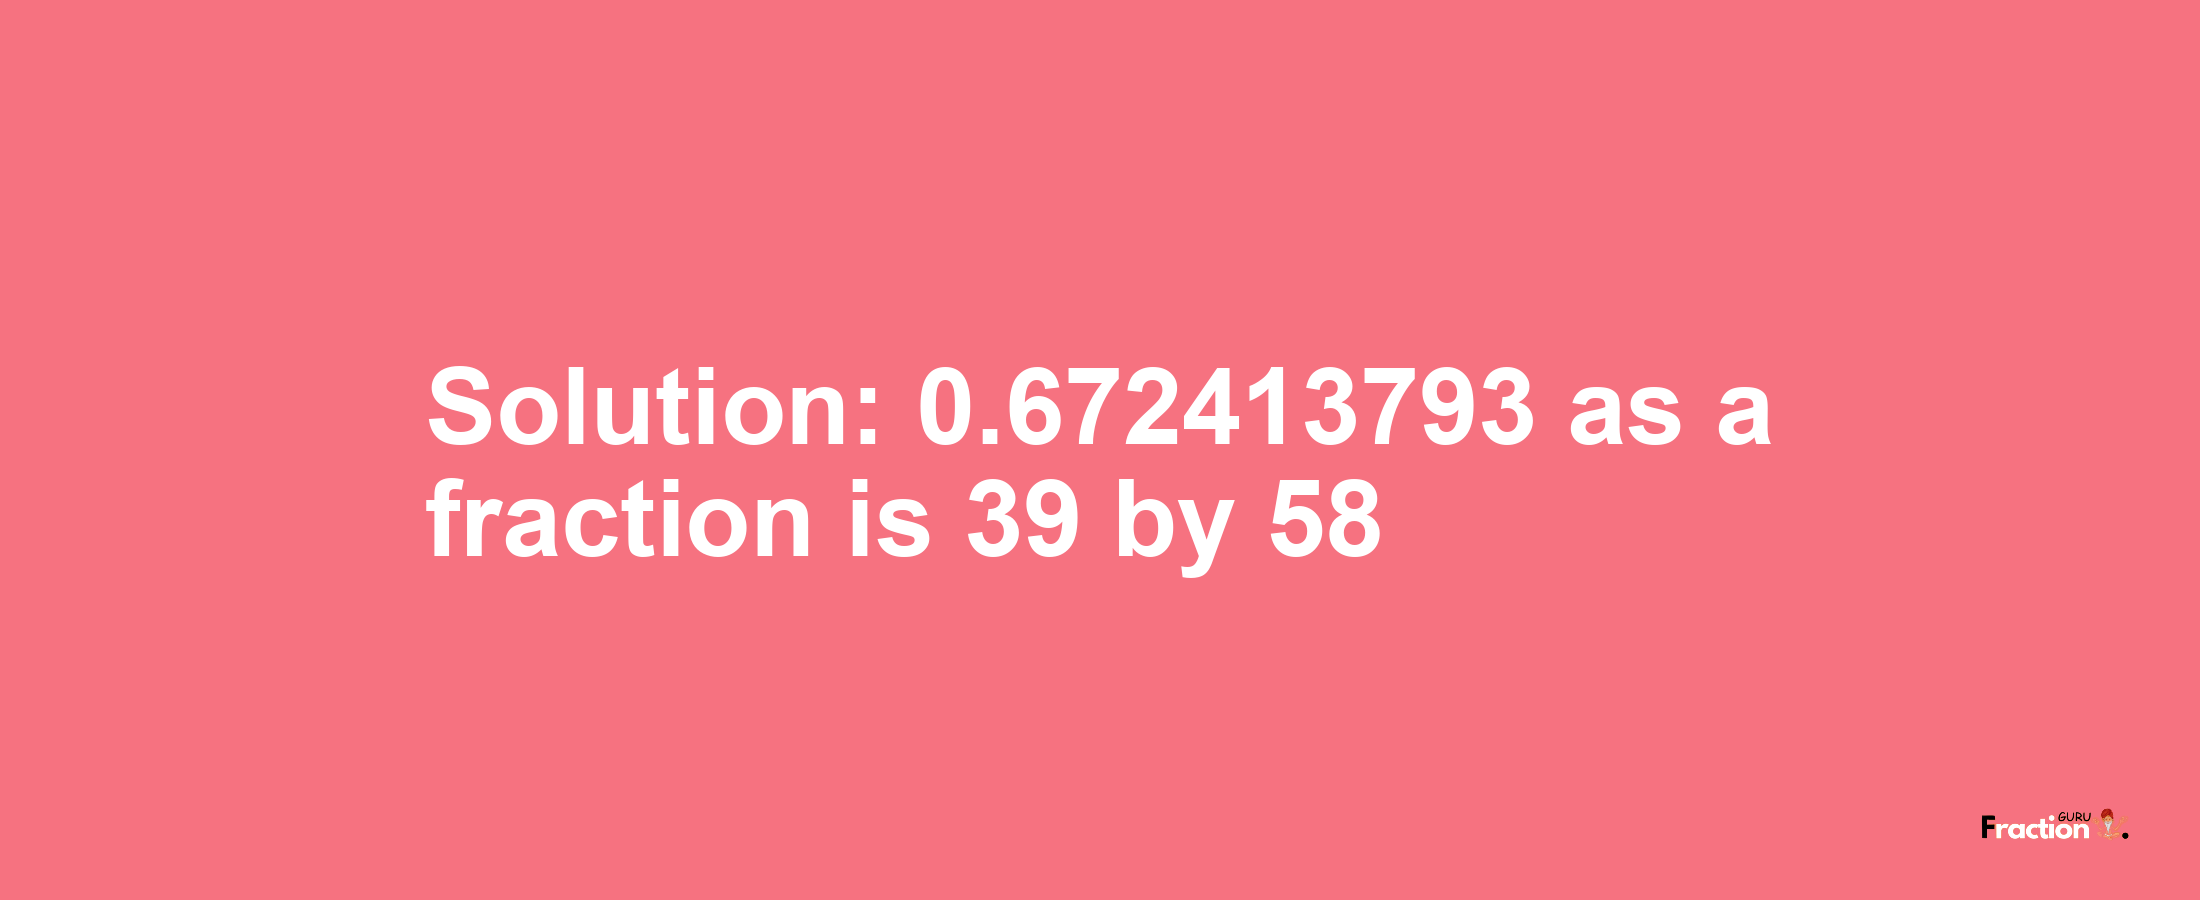 Solution:0.672413793 as a fraction is 39/58